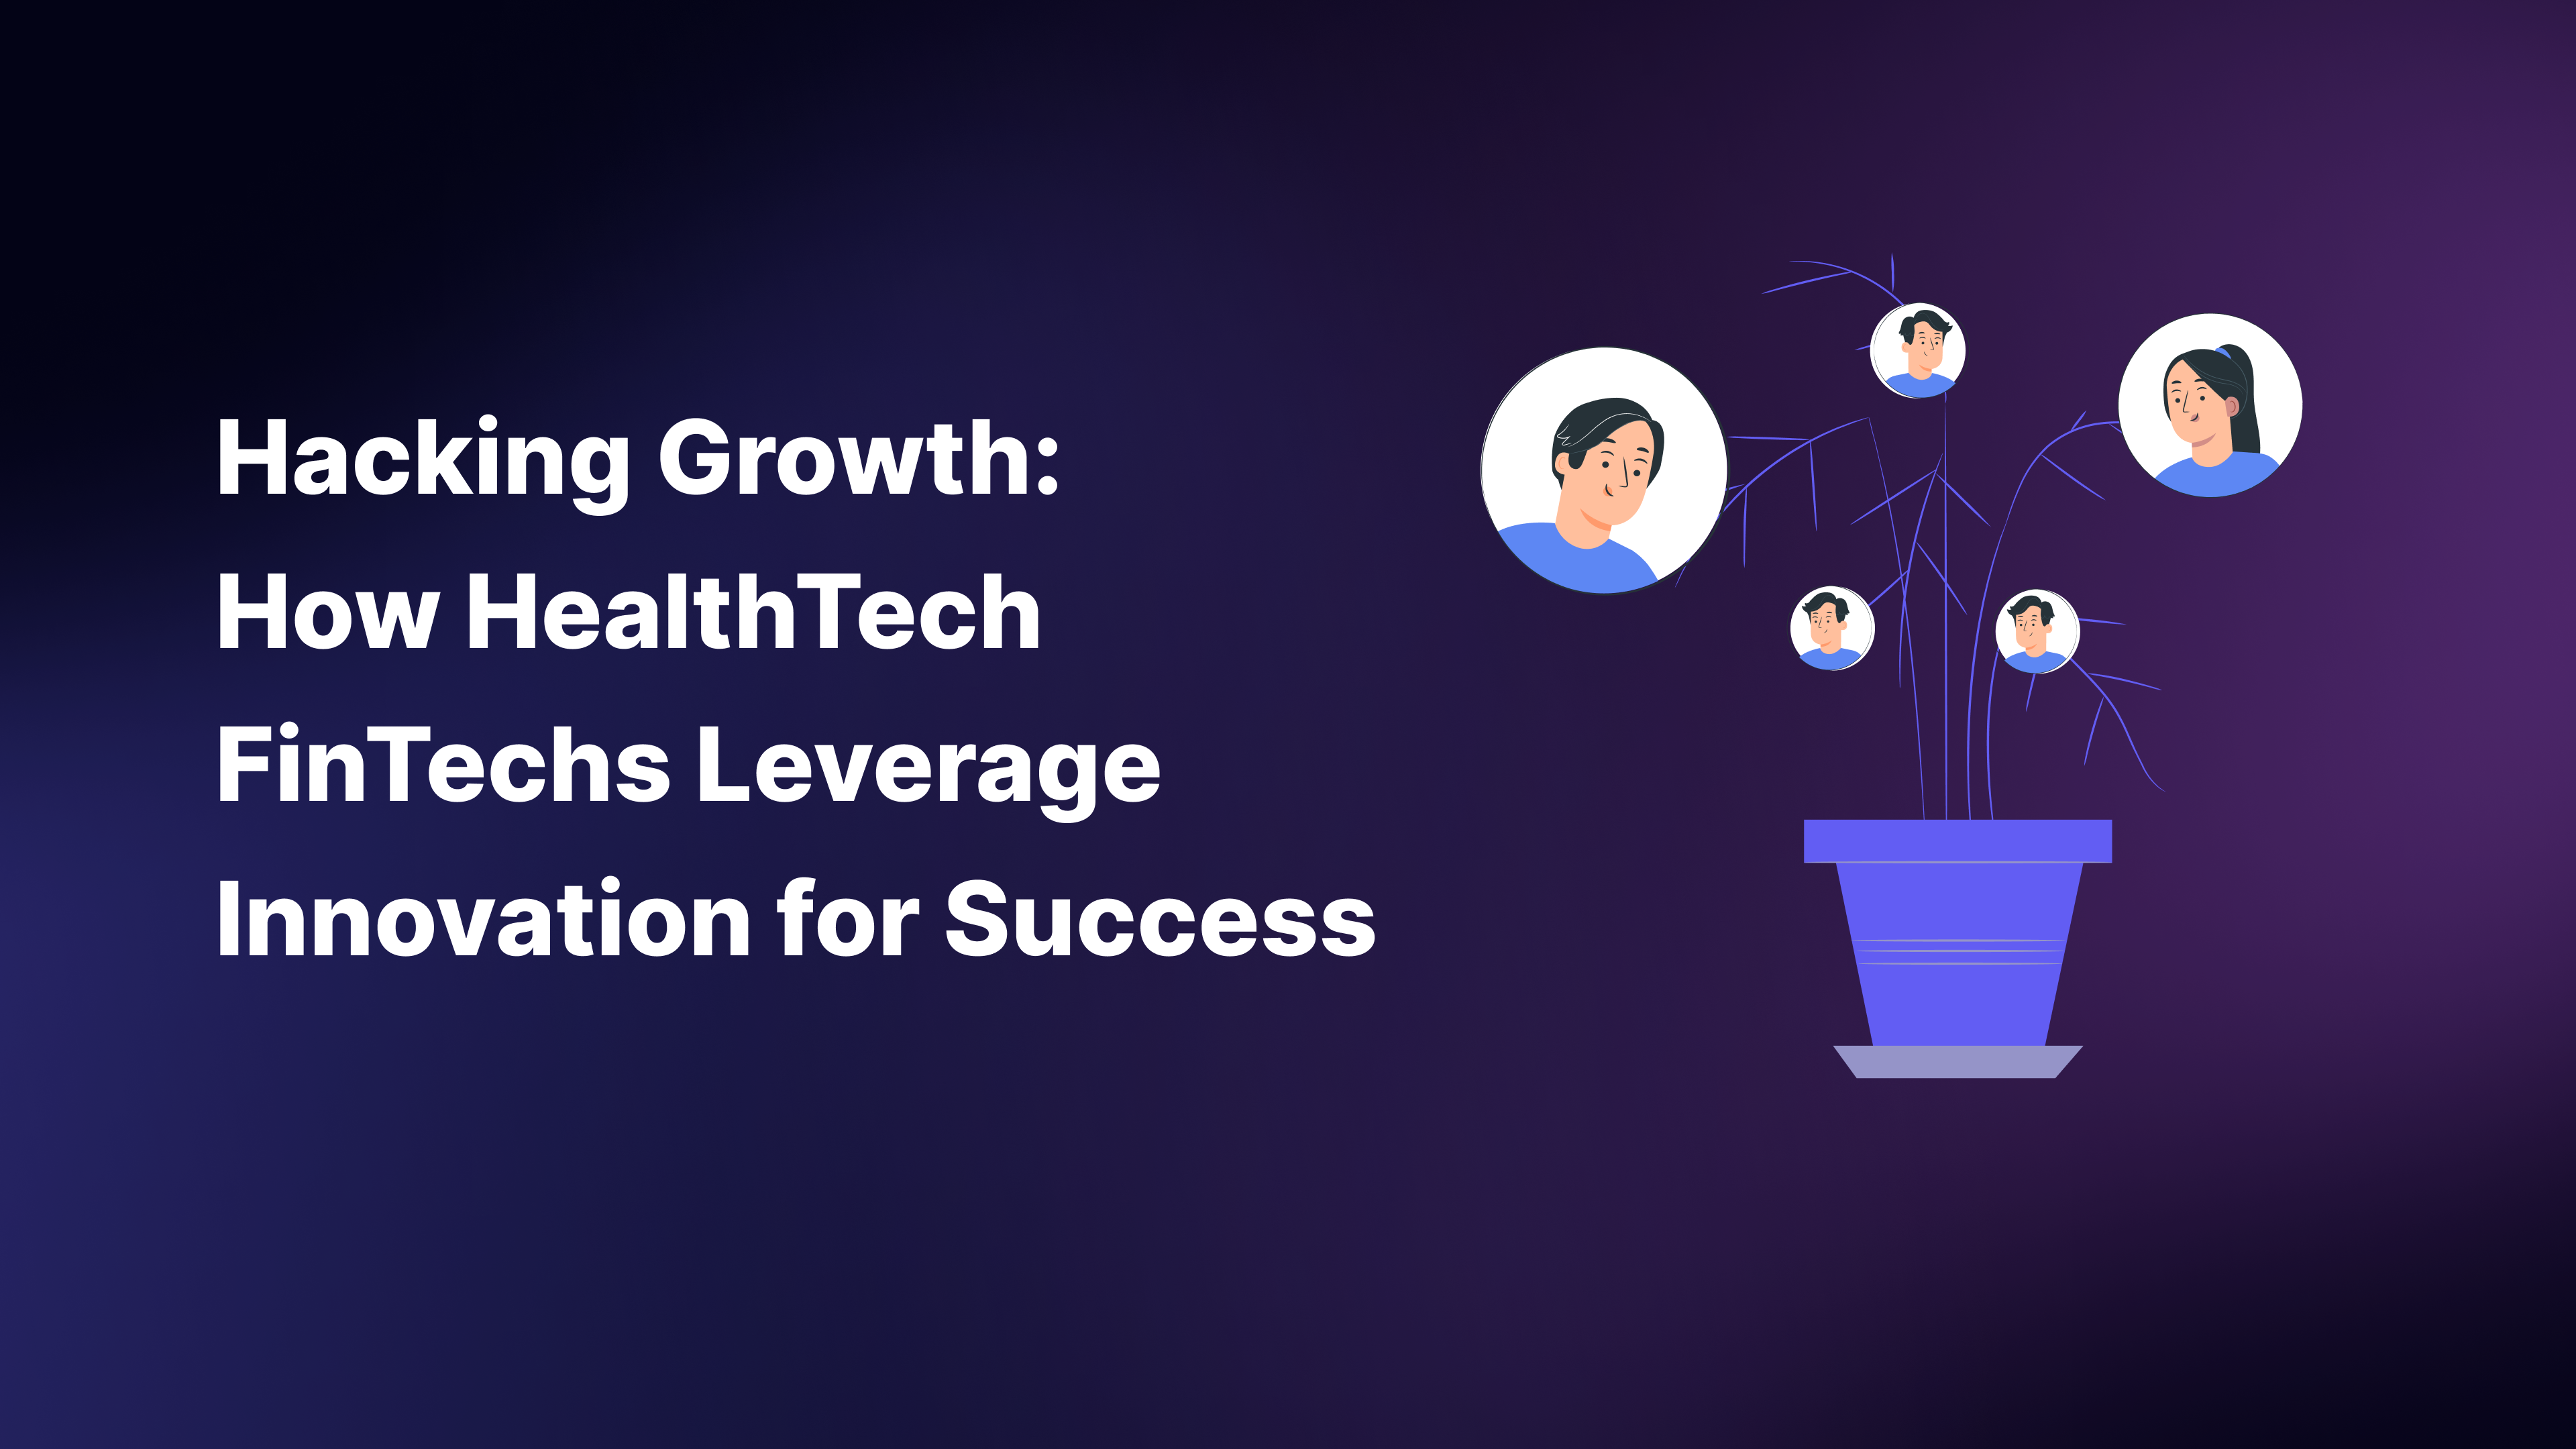 Hacking Growth: How HealthTech Leverage Innovation for Success